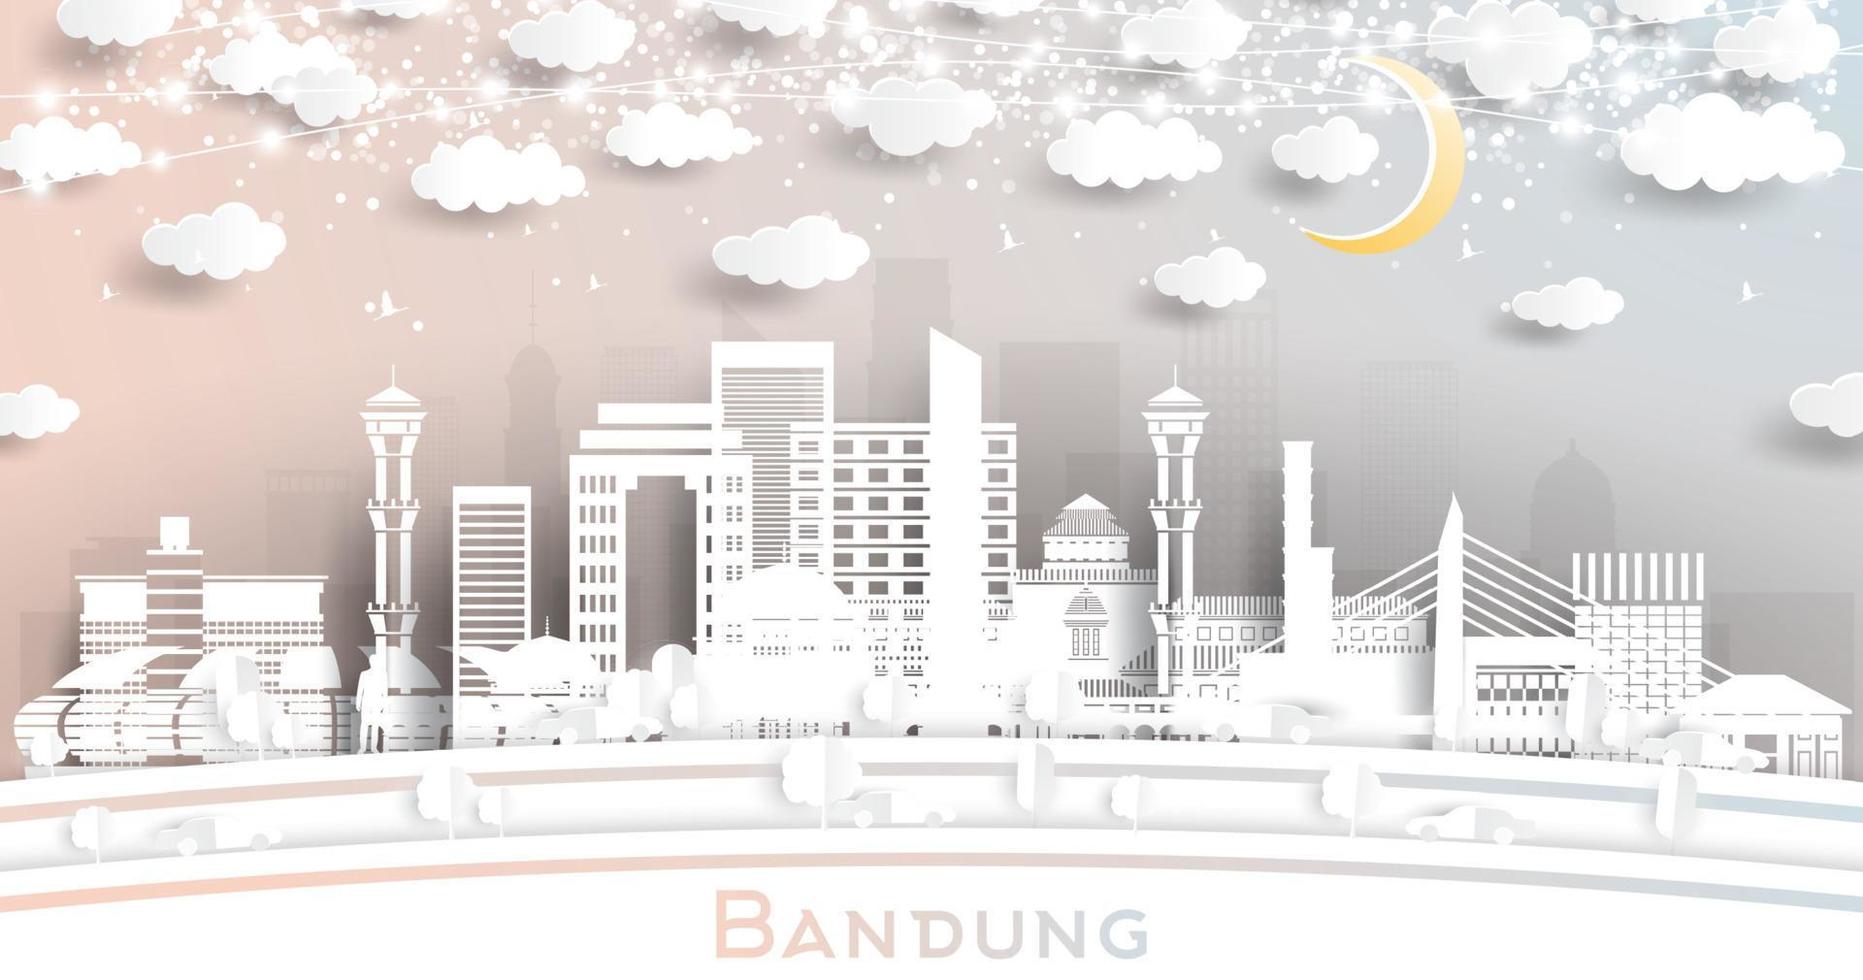 Bandung Indonesia City Skyline in Paper Cut Style with White Buildings, Moon and Neon Garland. vector